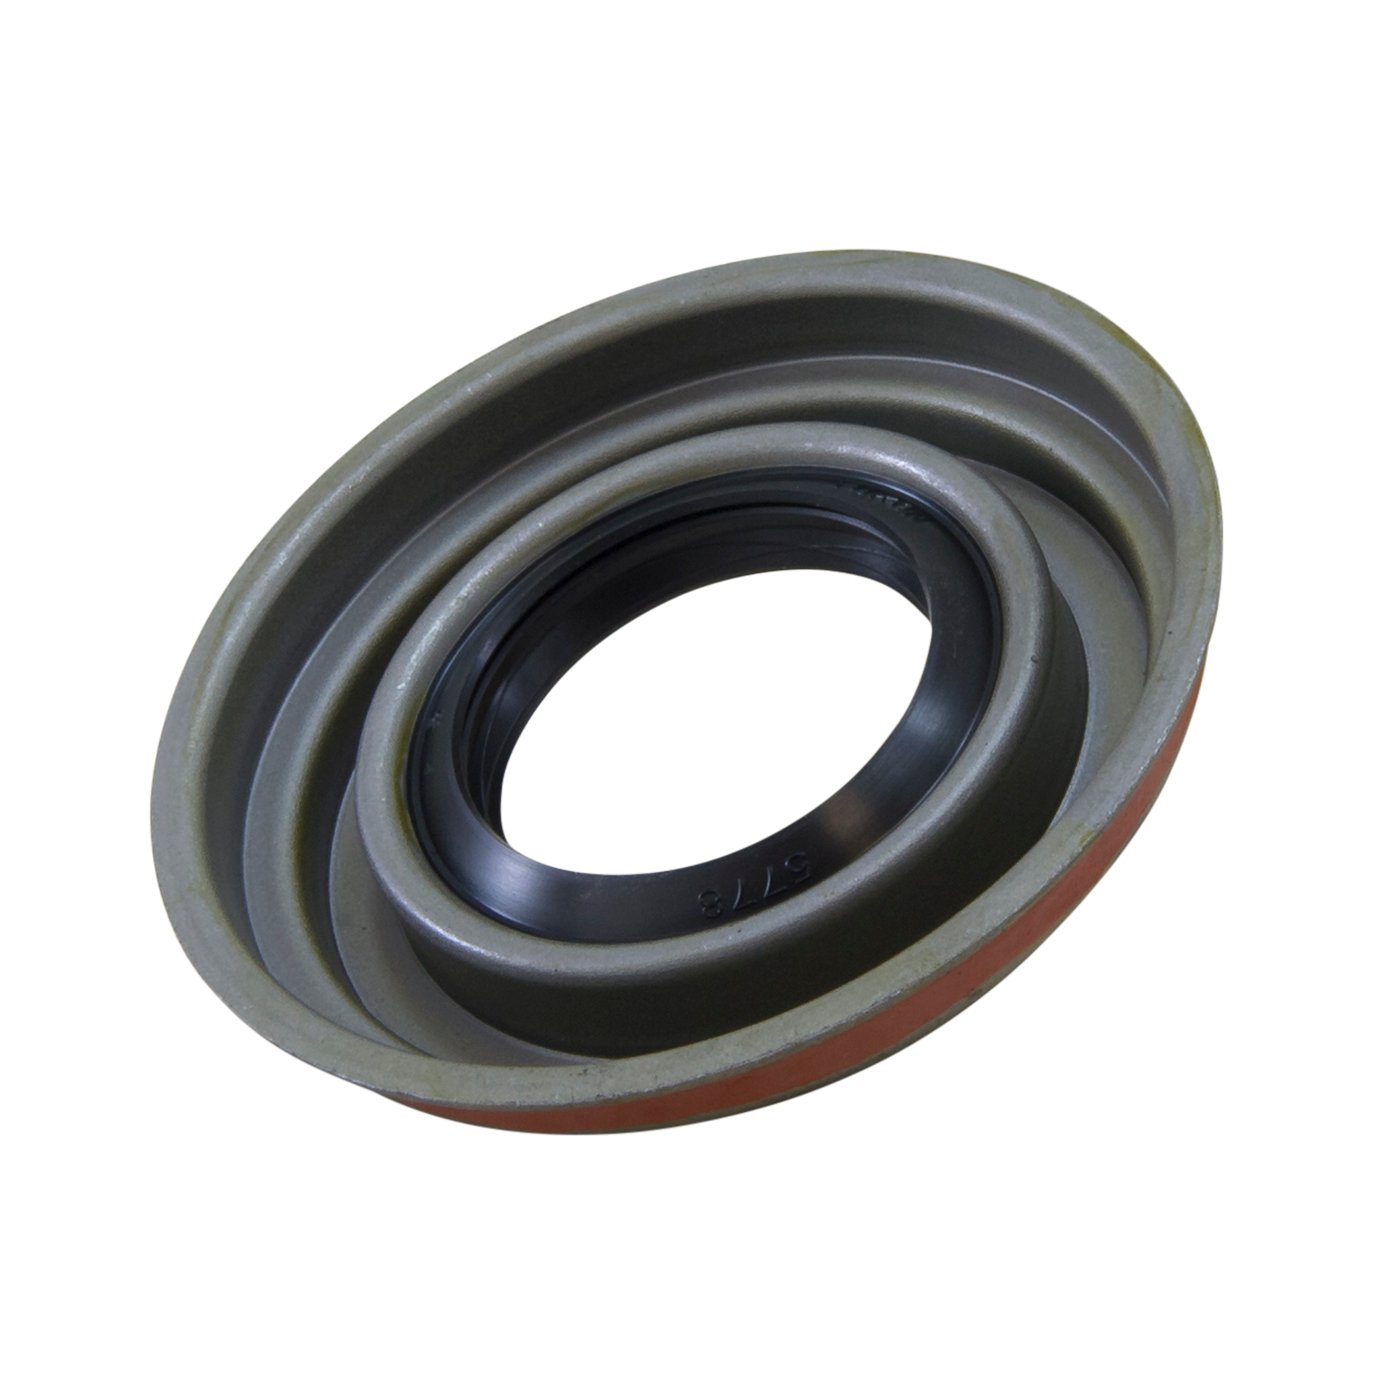 Replacement Pinion Seal, Dana 50 Late Model (Some 2000-Up) & Dana 30 Wj 01-Up